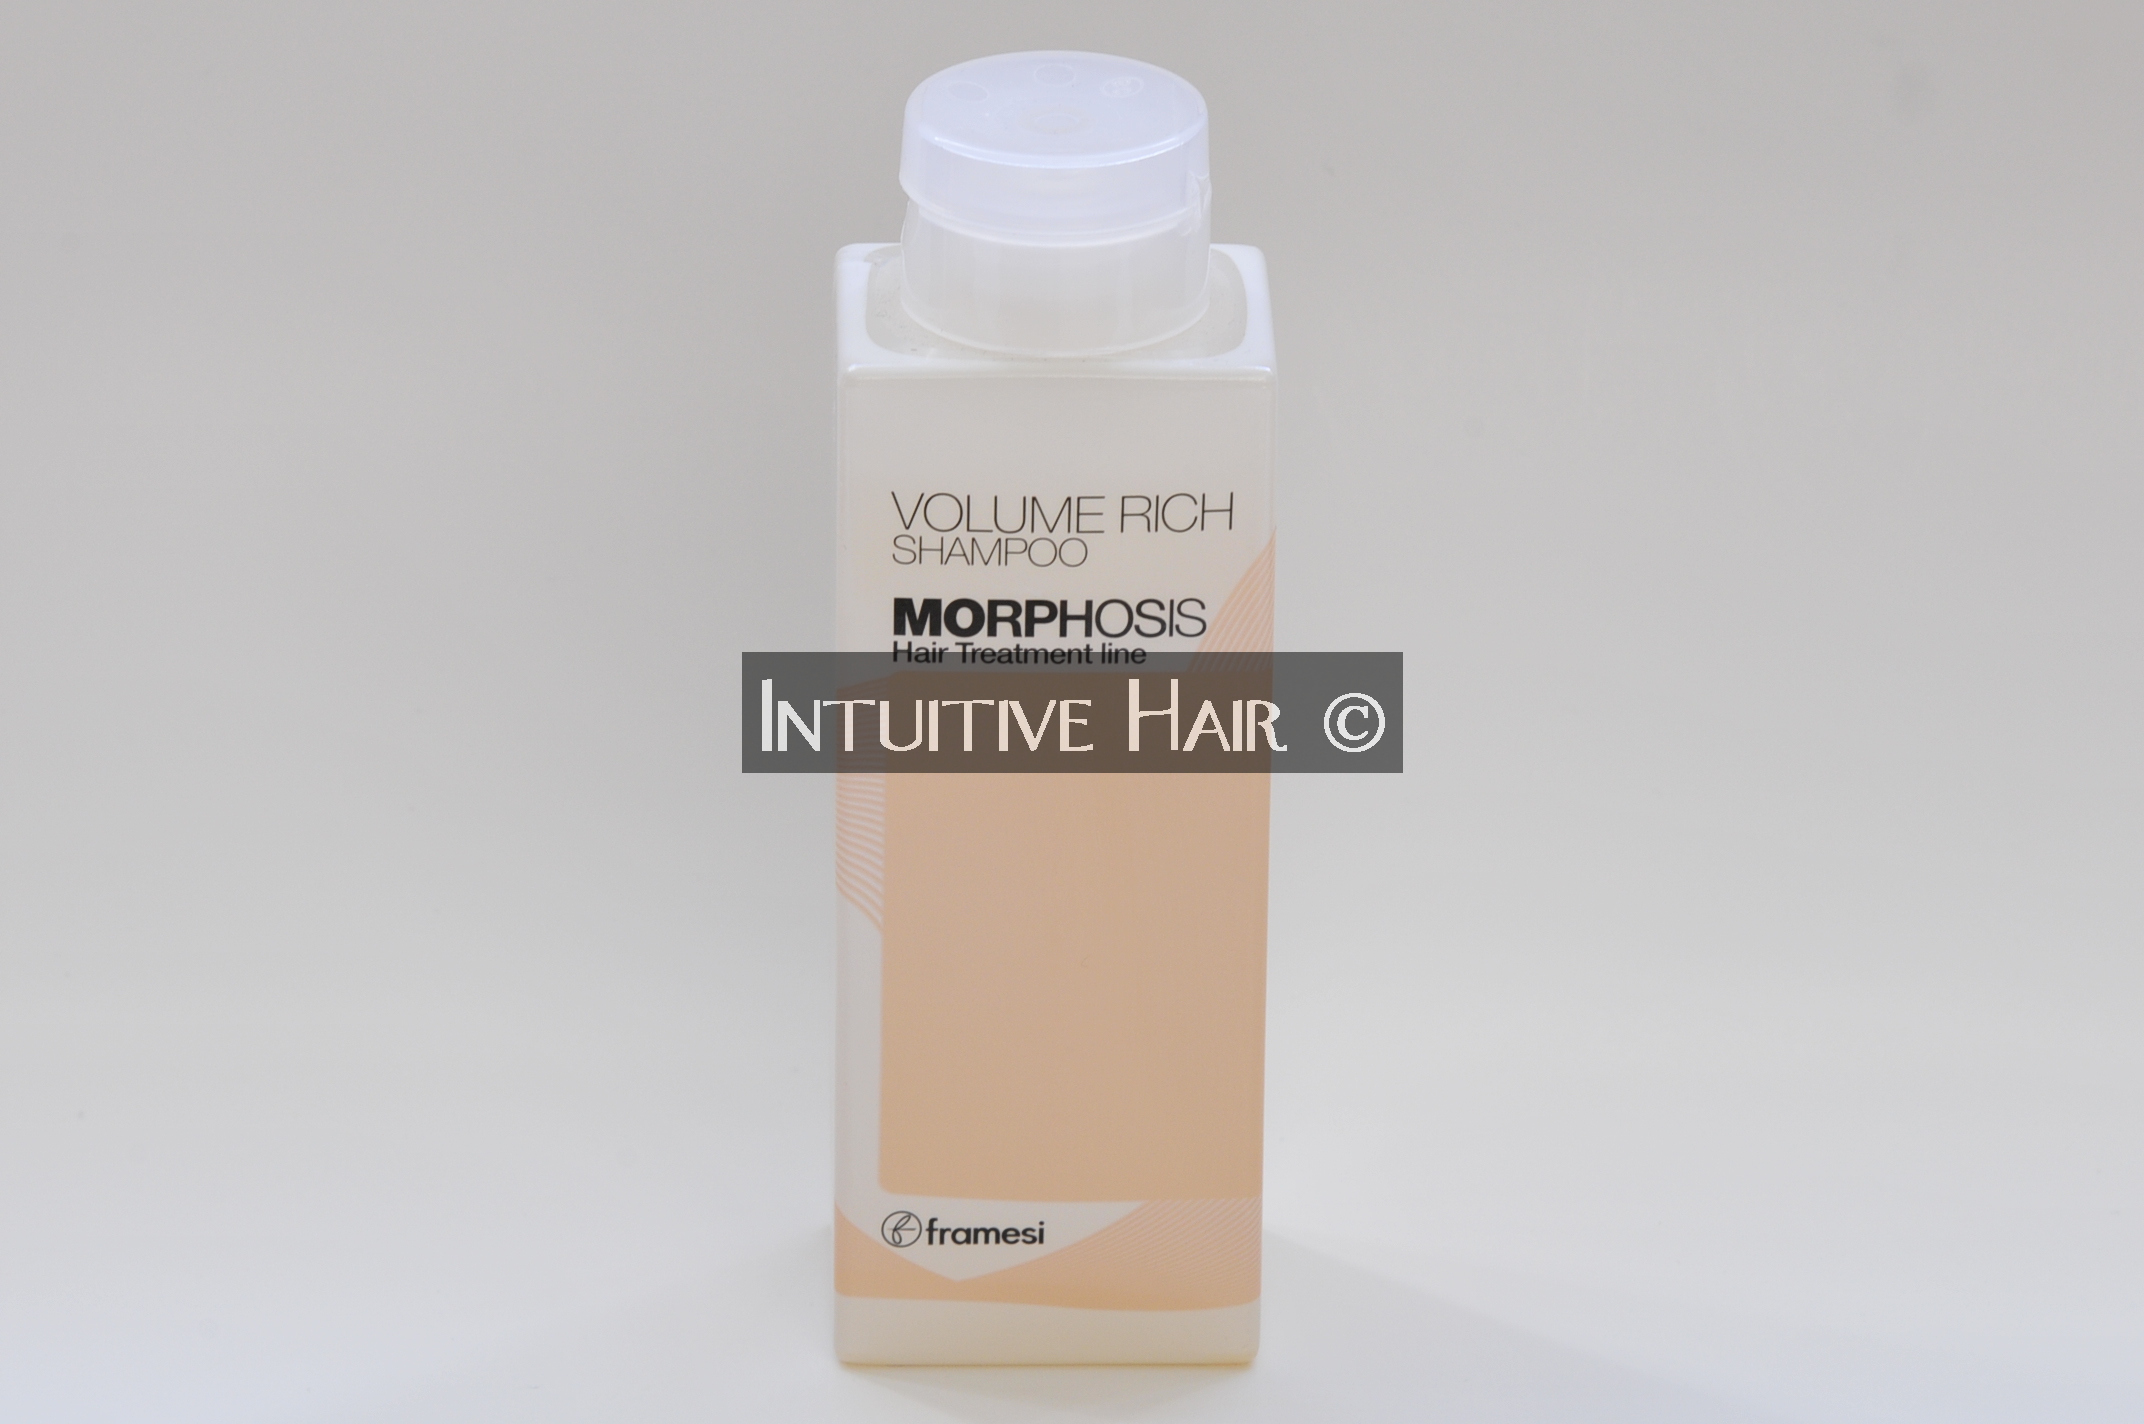   and repair the hair adding body and volume active ingredient sericina